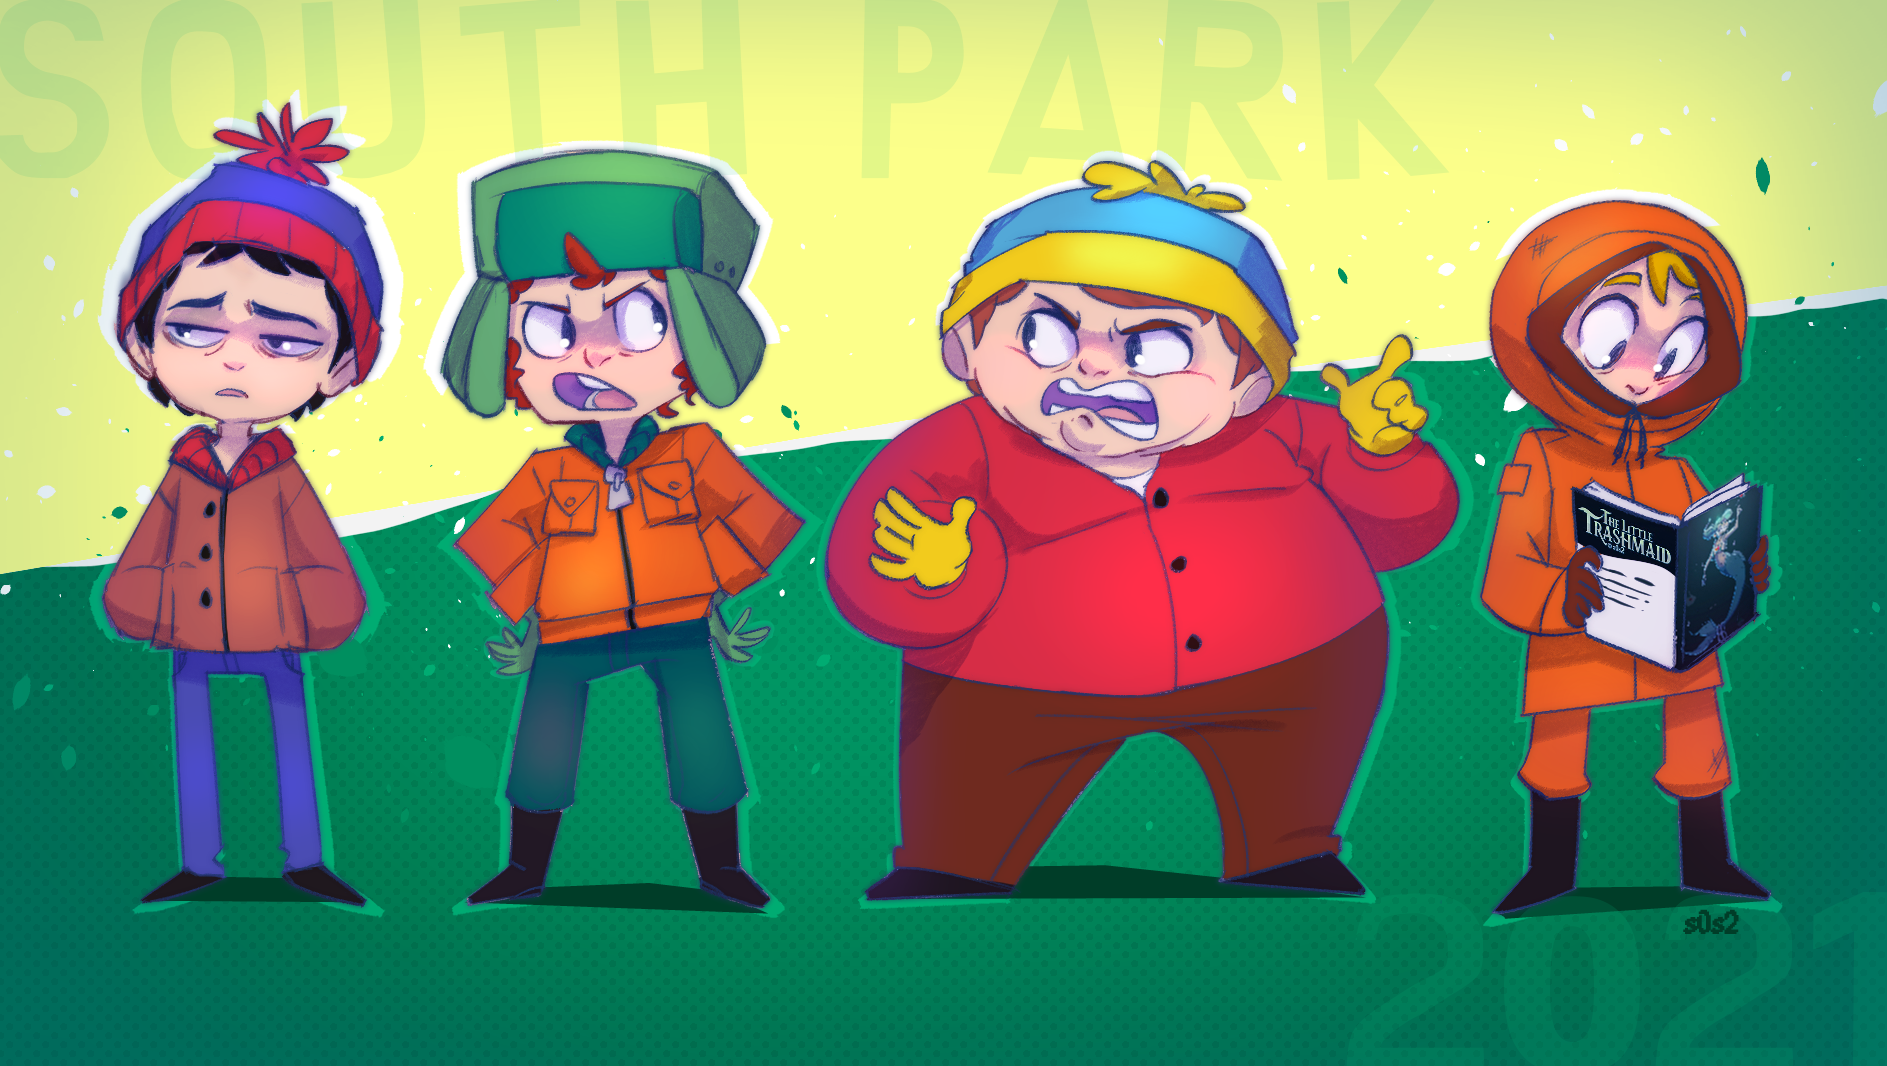 South Park Art by s0s2